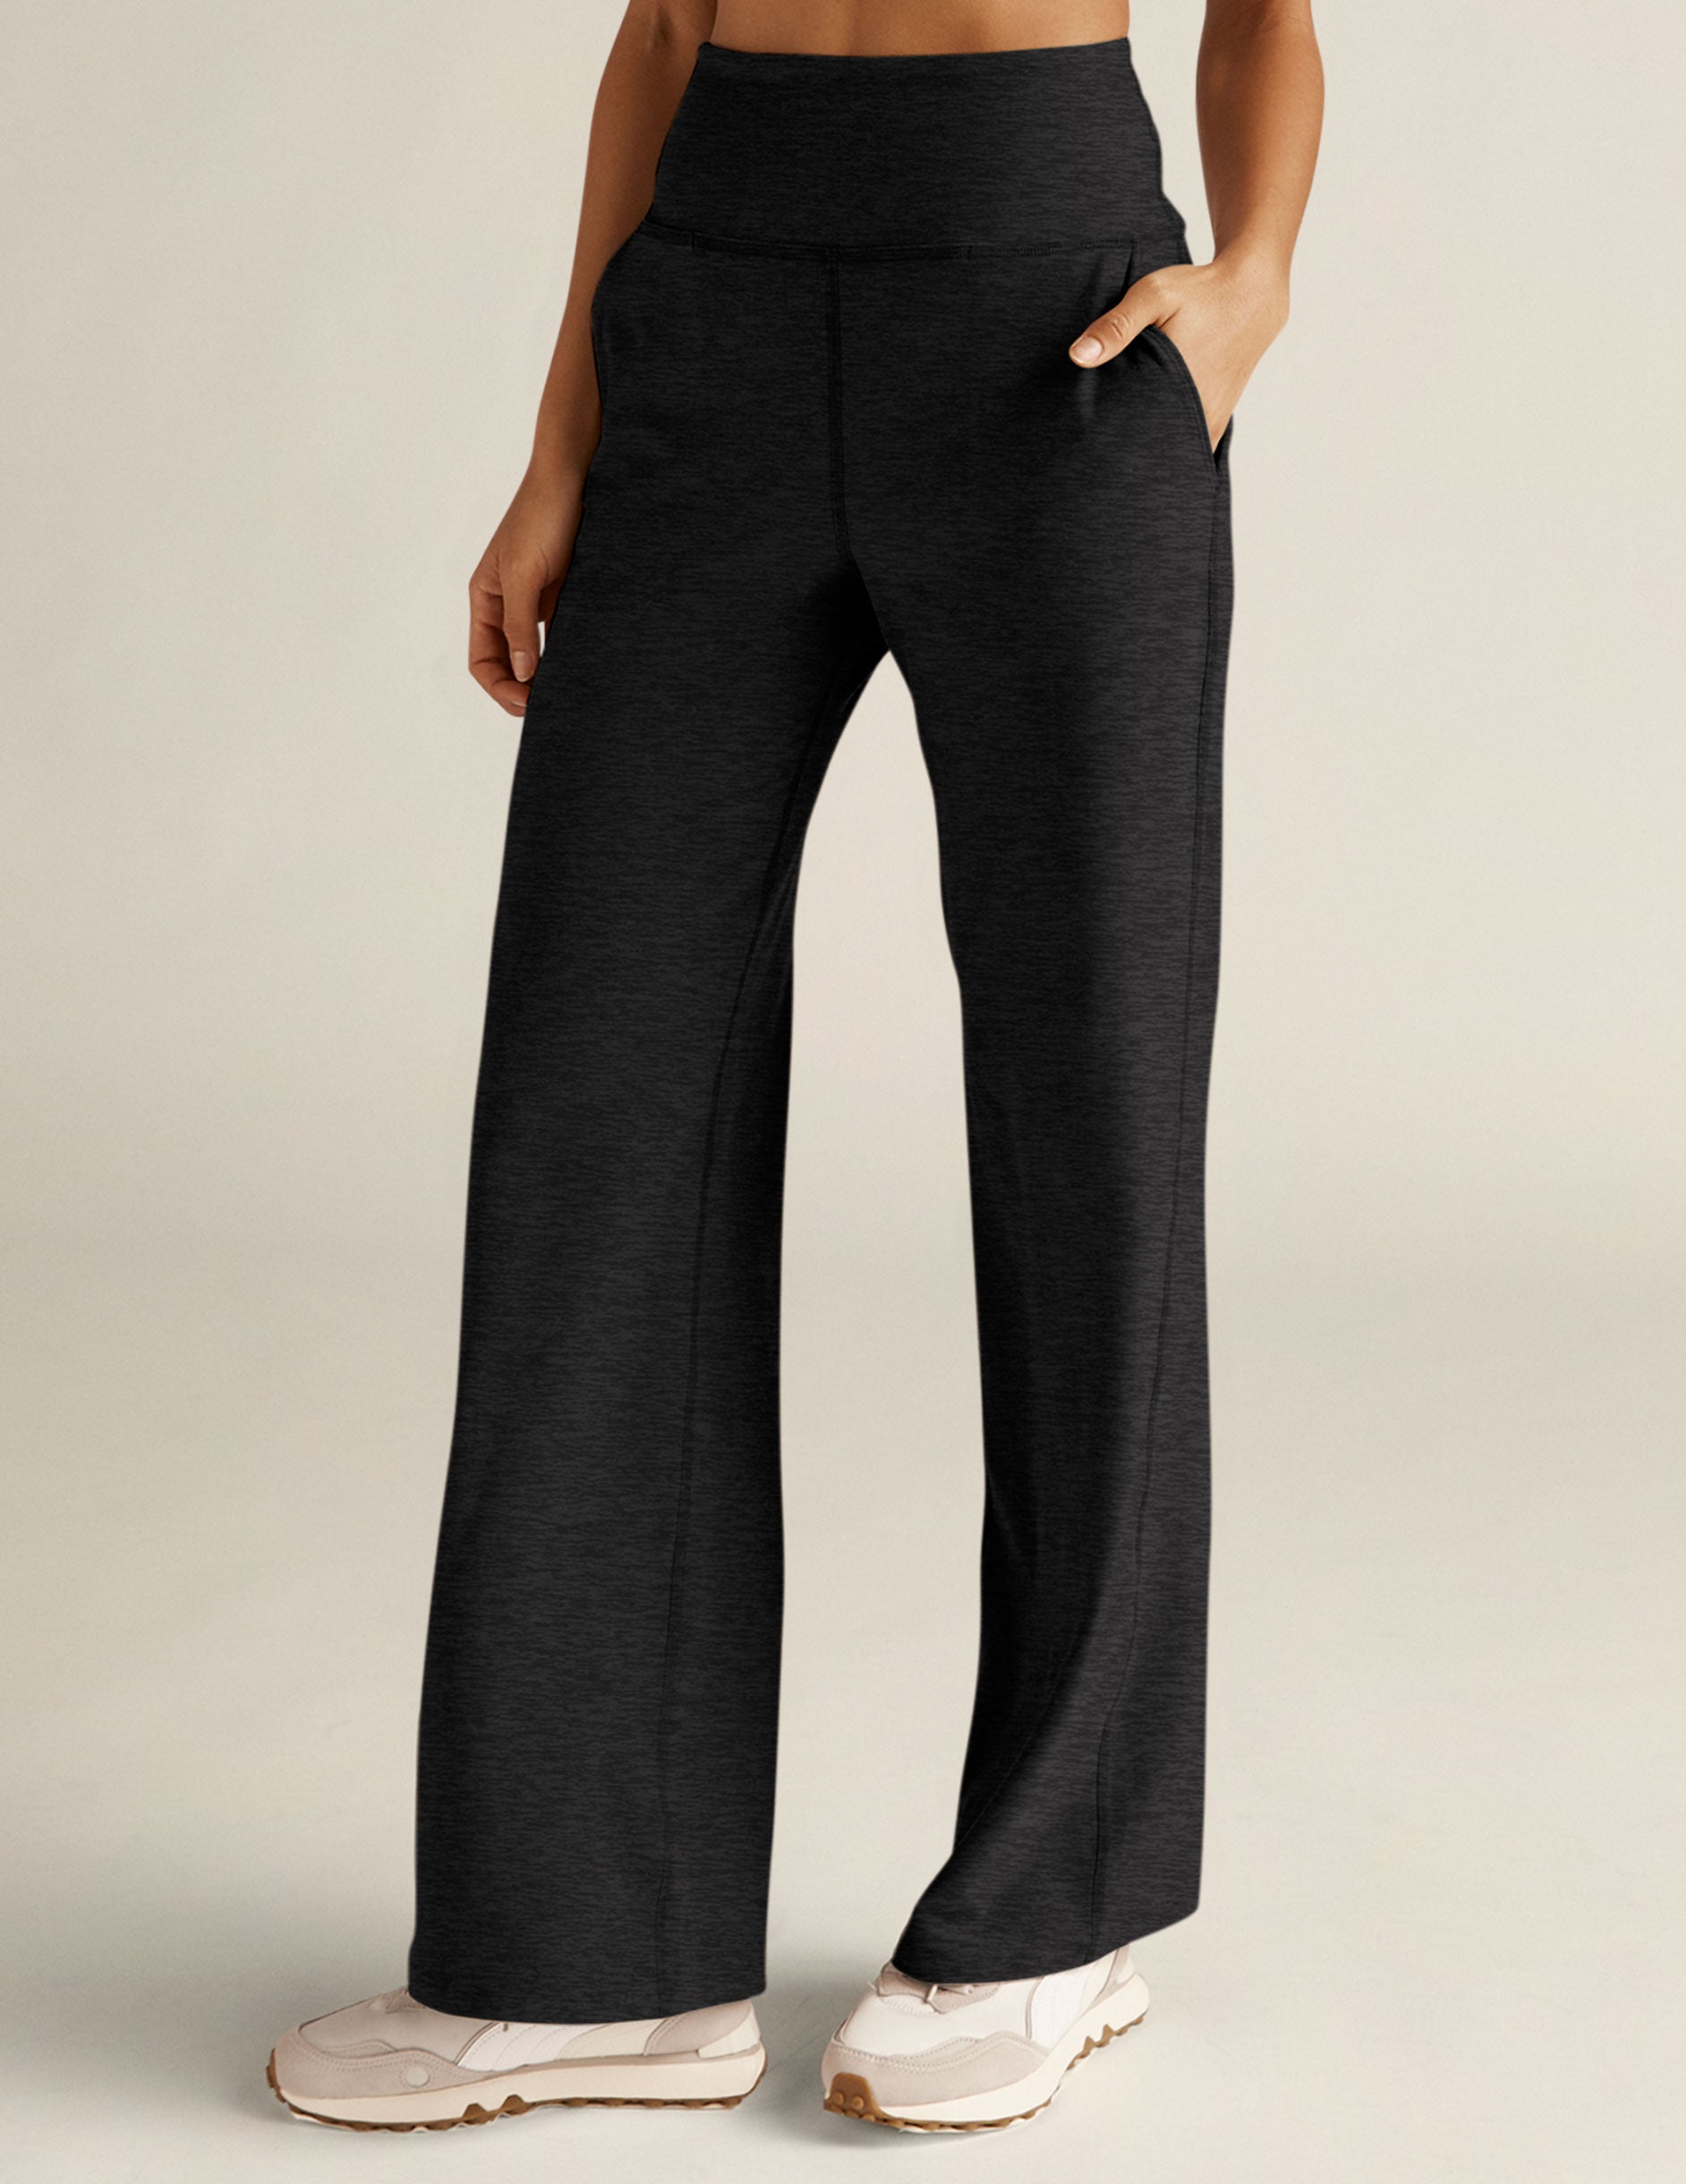 Beyond Yoga Spacedye Retro Cropped Pants for Women Offers Pull-On Style,  Elasticized Waistband and Cropped Silhouette